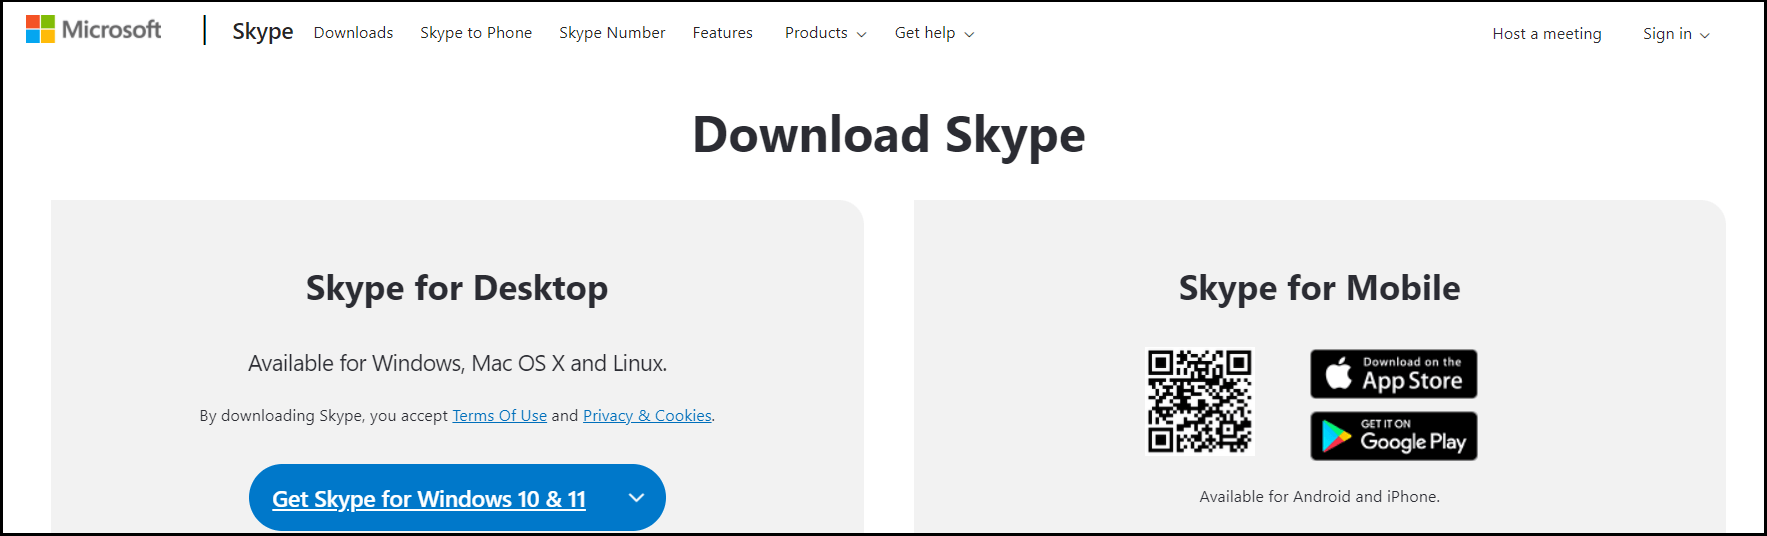 Microsoft’s Skype video chat download page